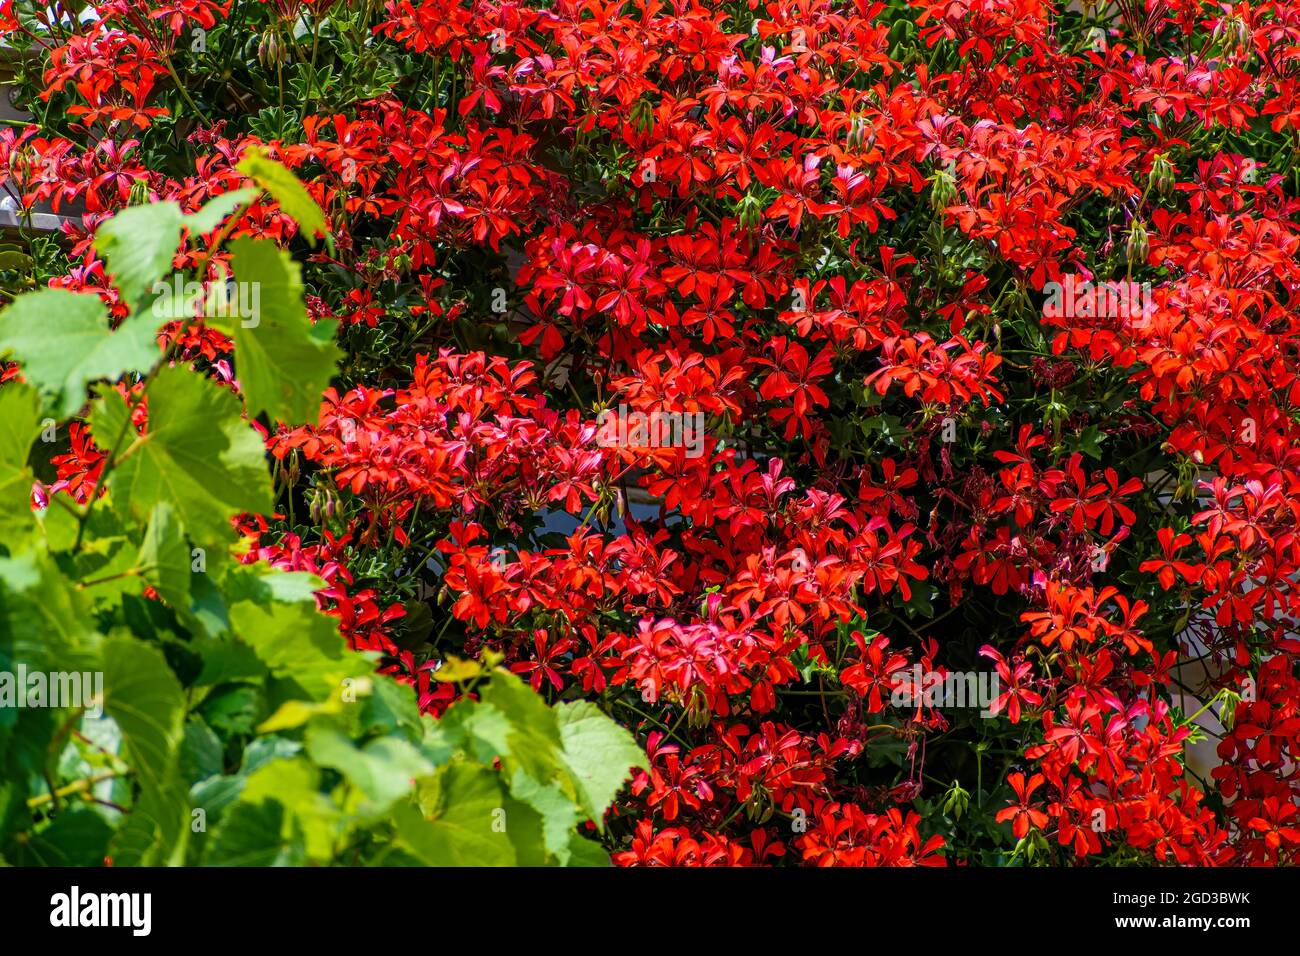 Beautiful shot of red moss phlox flowering plant growing in the garden Stock Photo